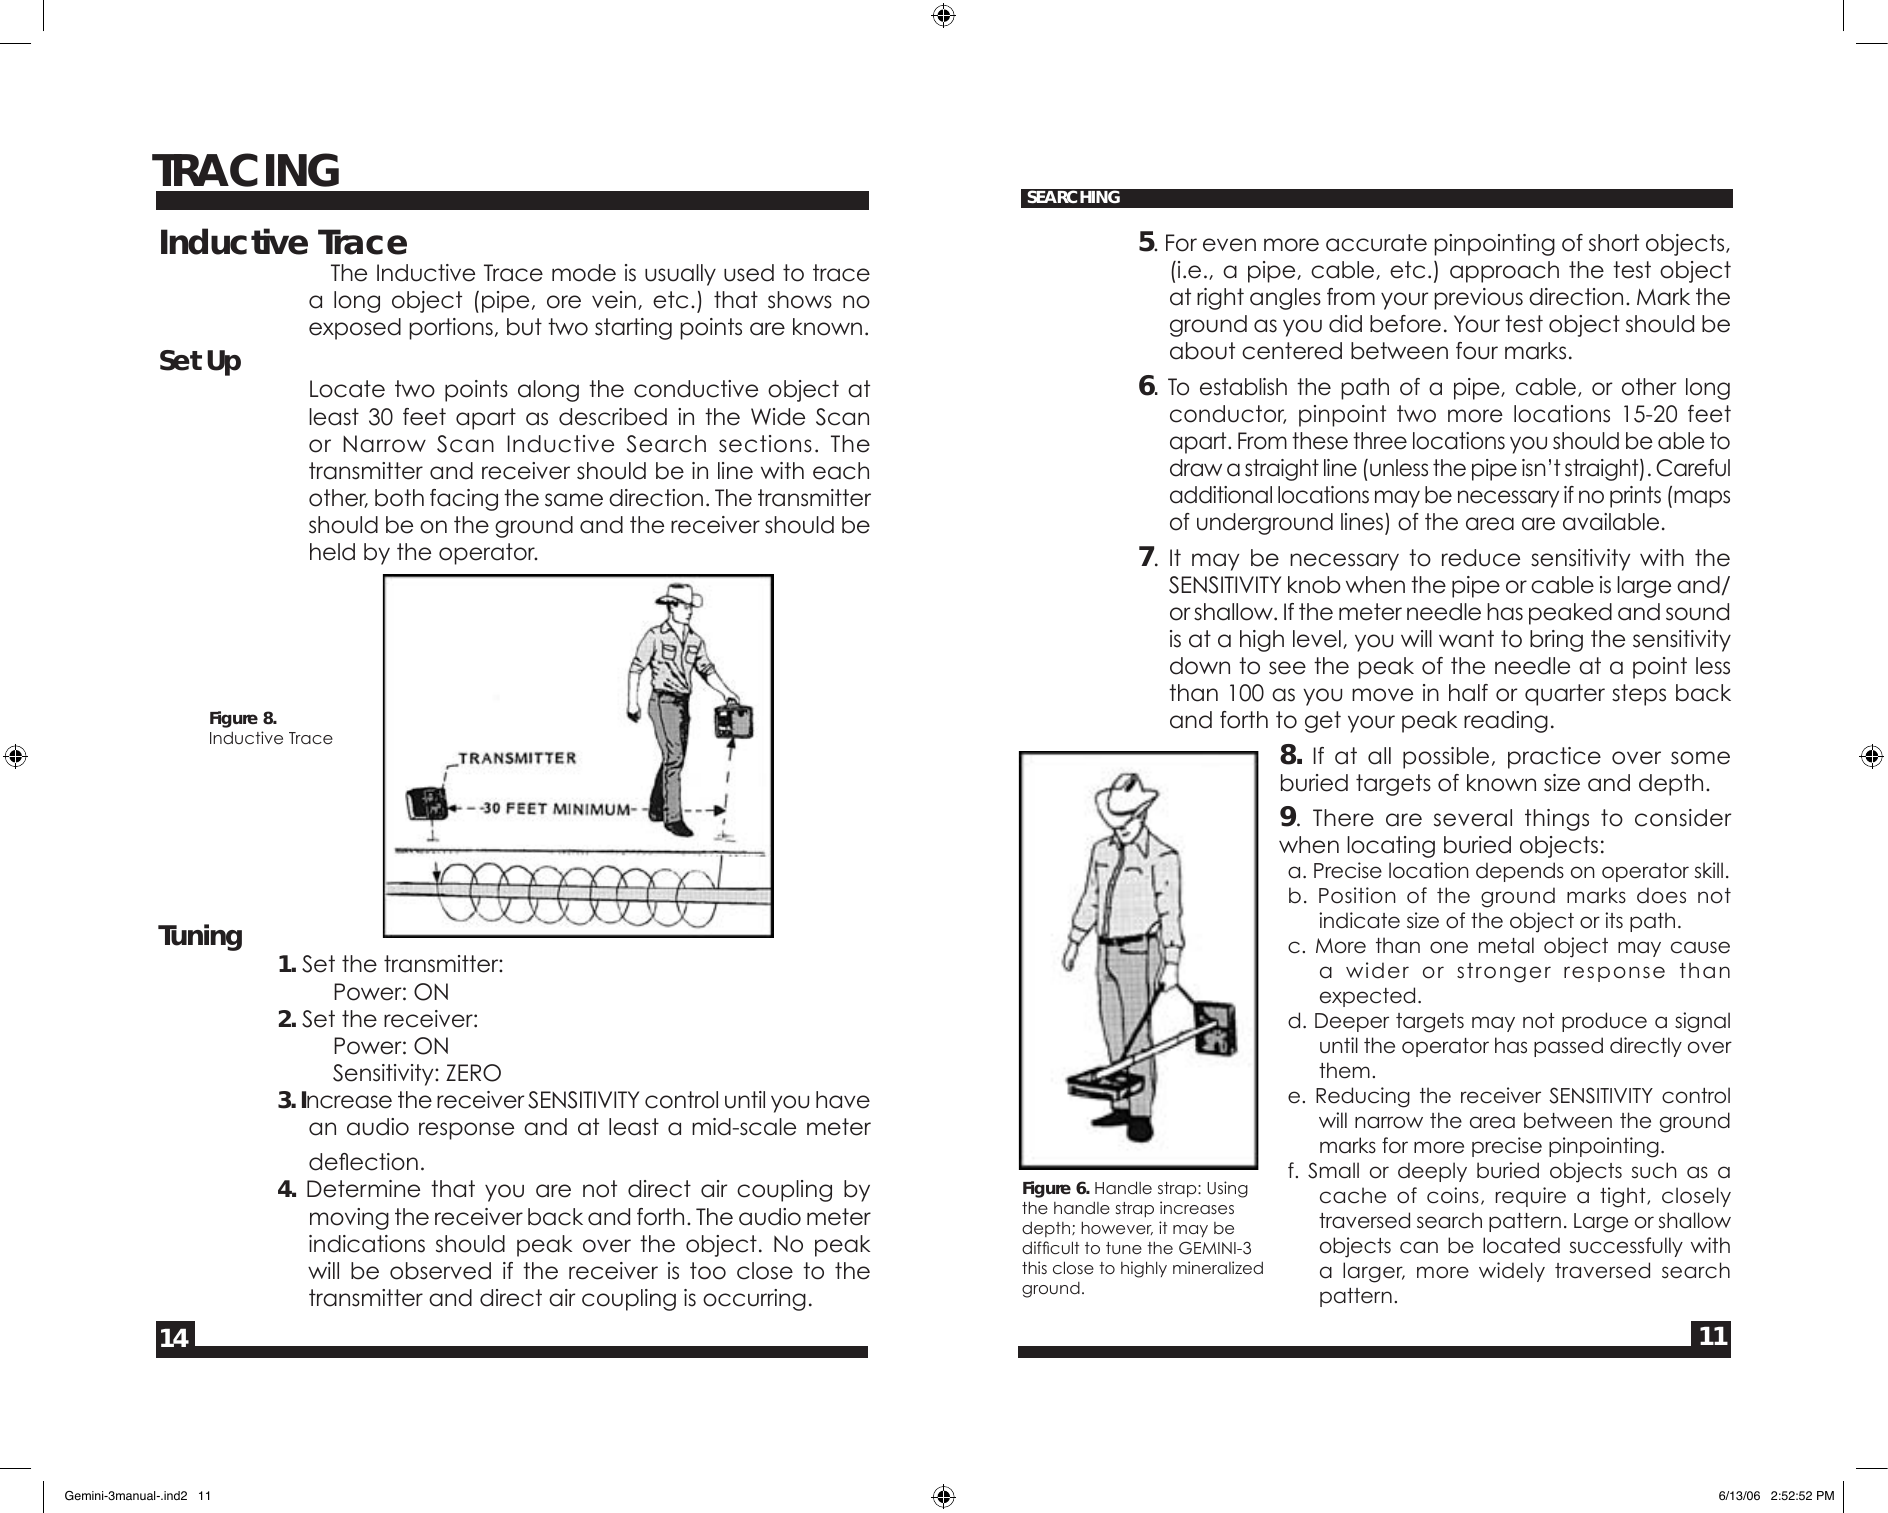 Page 11 of 12 - Fisher Fisher-M-Scope-Gemini-3-Users-Manual-  Fisher-m-scope-gemini-3-users-manual